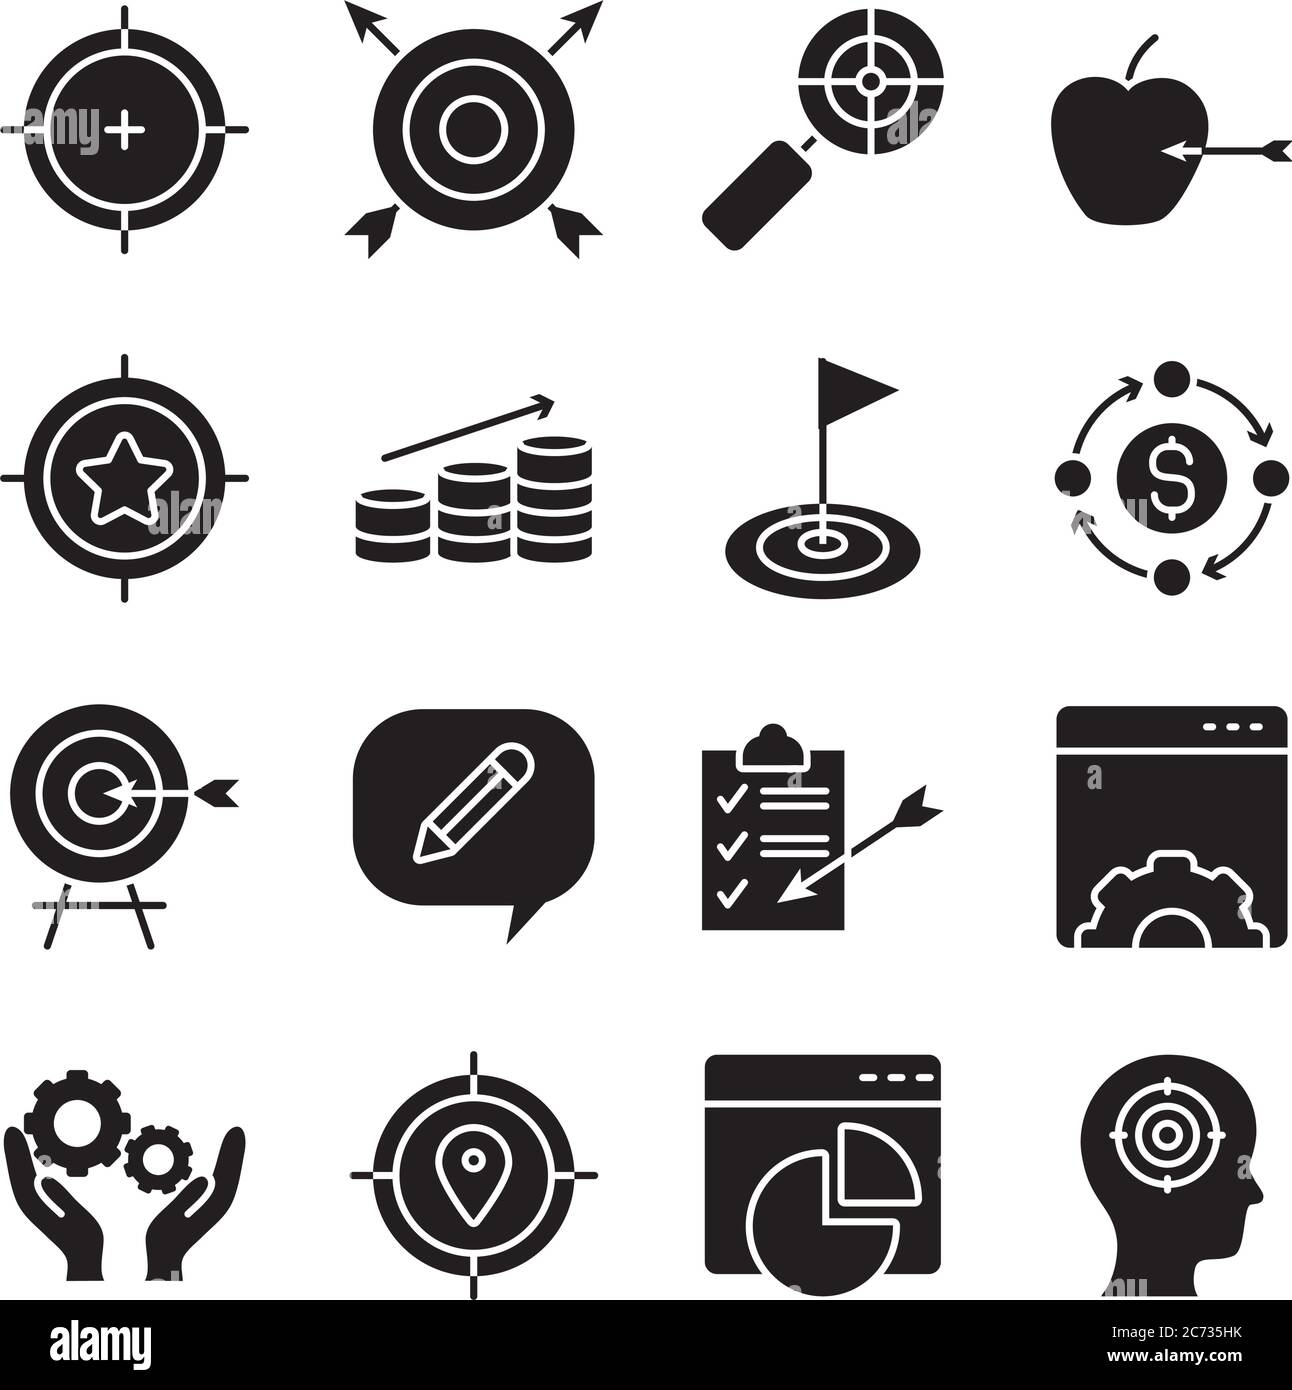 icon set of apple and profile head over white background, line style, vector illustration Stock Vector